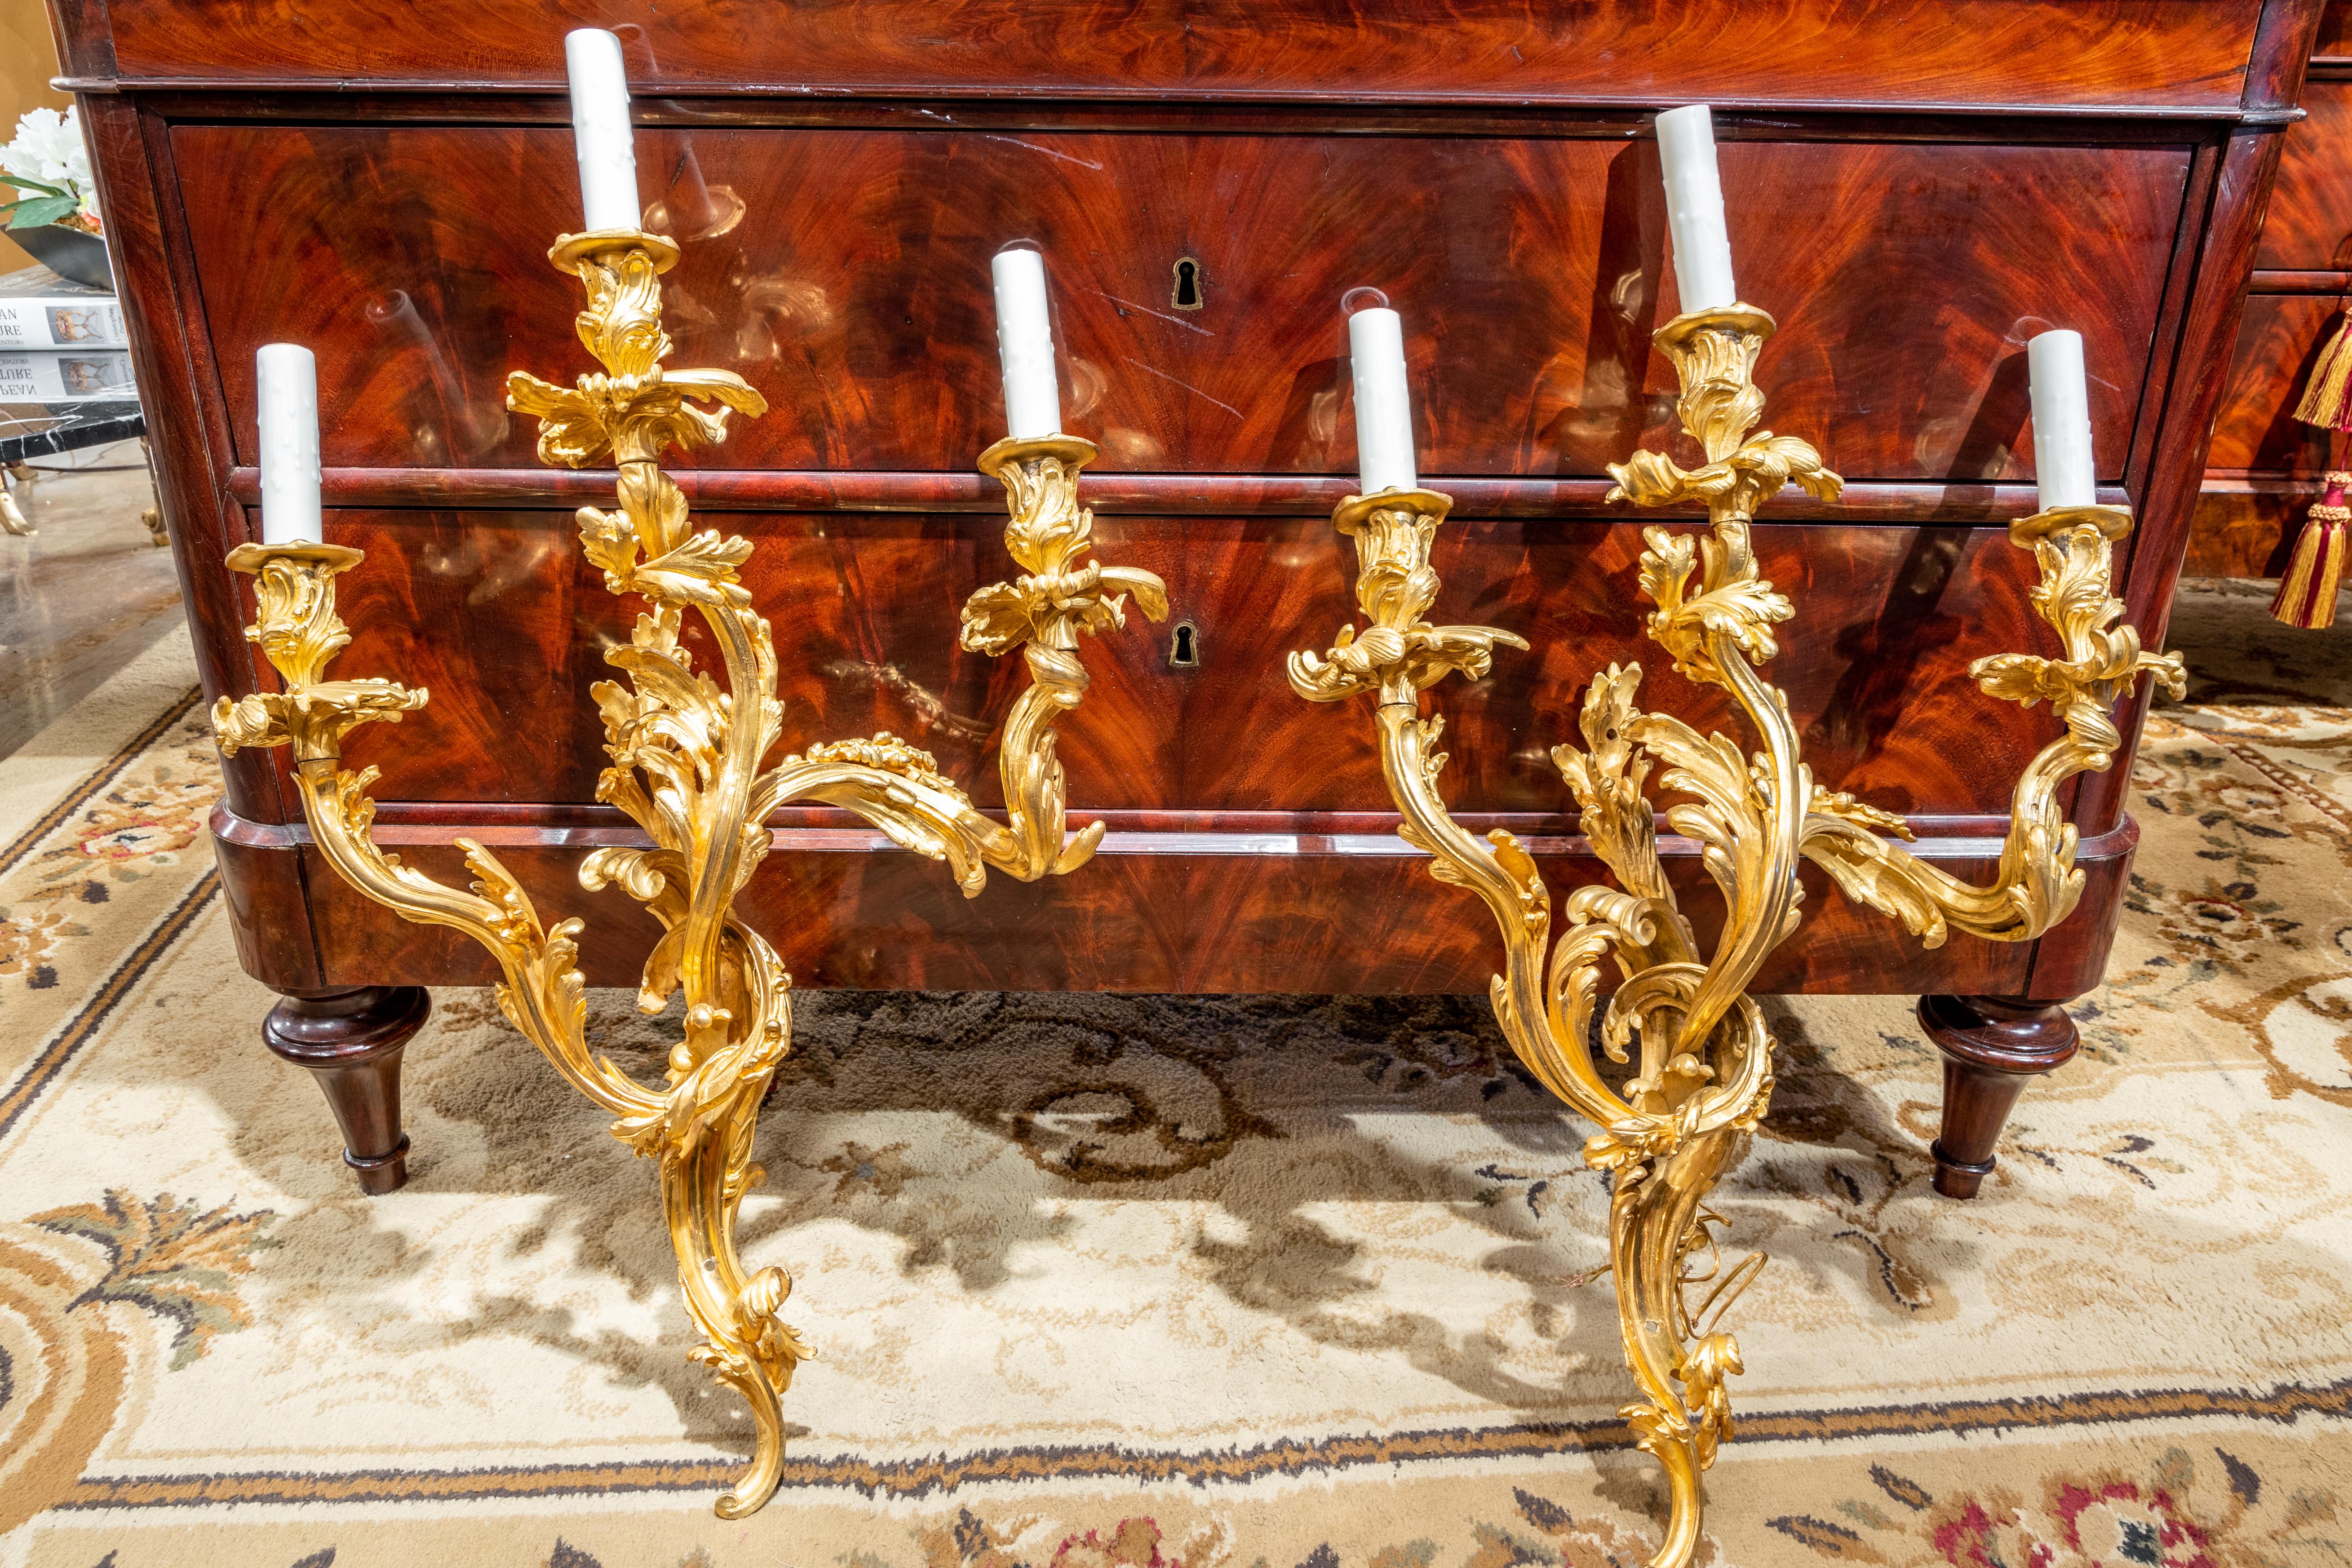 A fine pair of 19th century French Louis XV gilt bronze large sconces with fine detail.